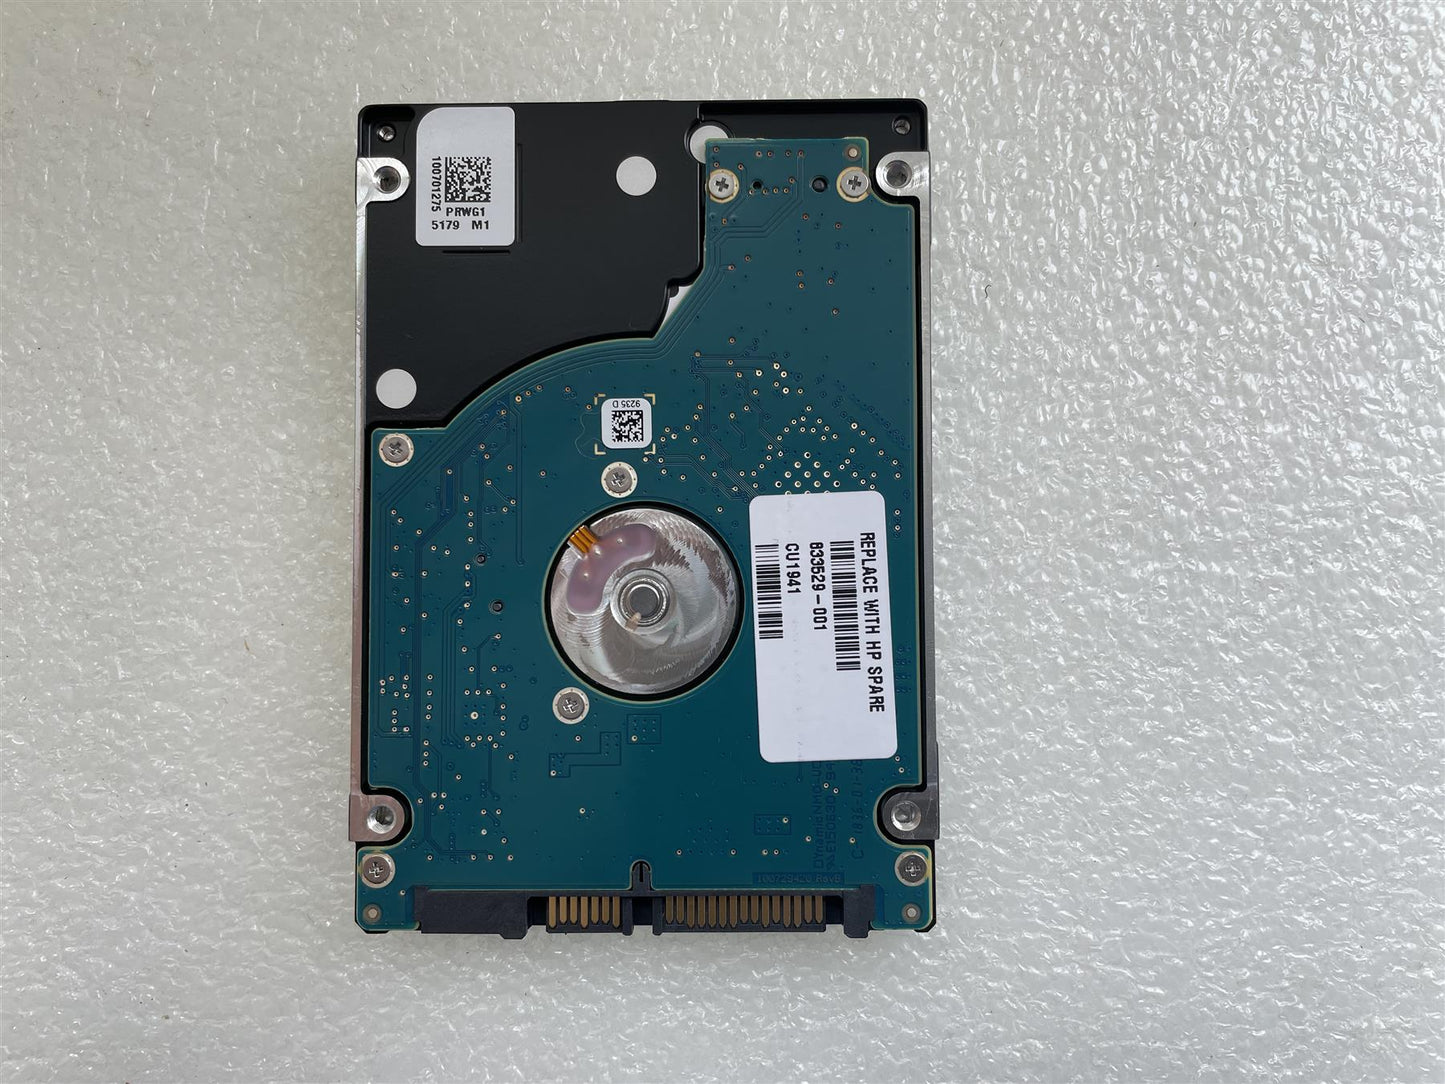 For HP 833529-001 Seagate ST500LM023 500GB HDD Hard Disk Drive SATA 805217-011